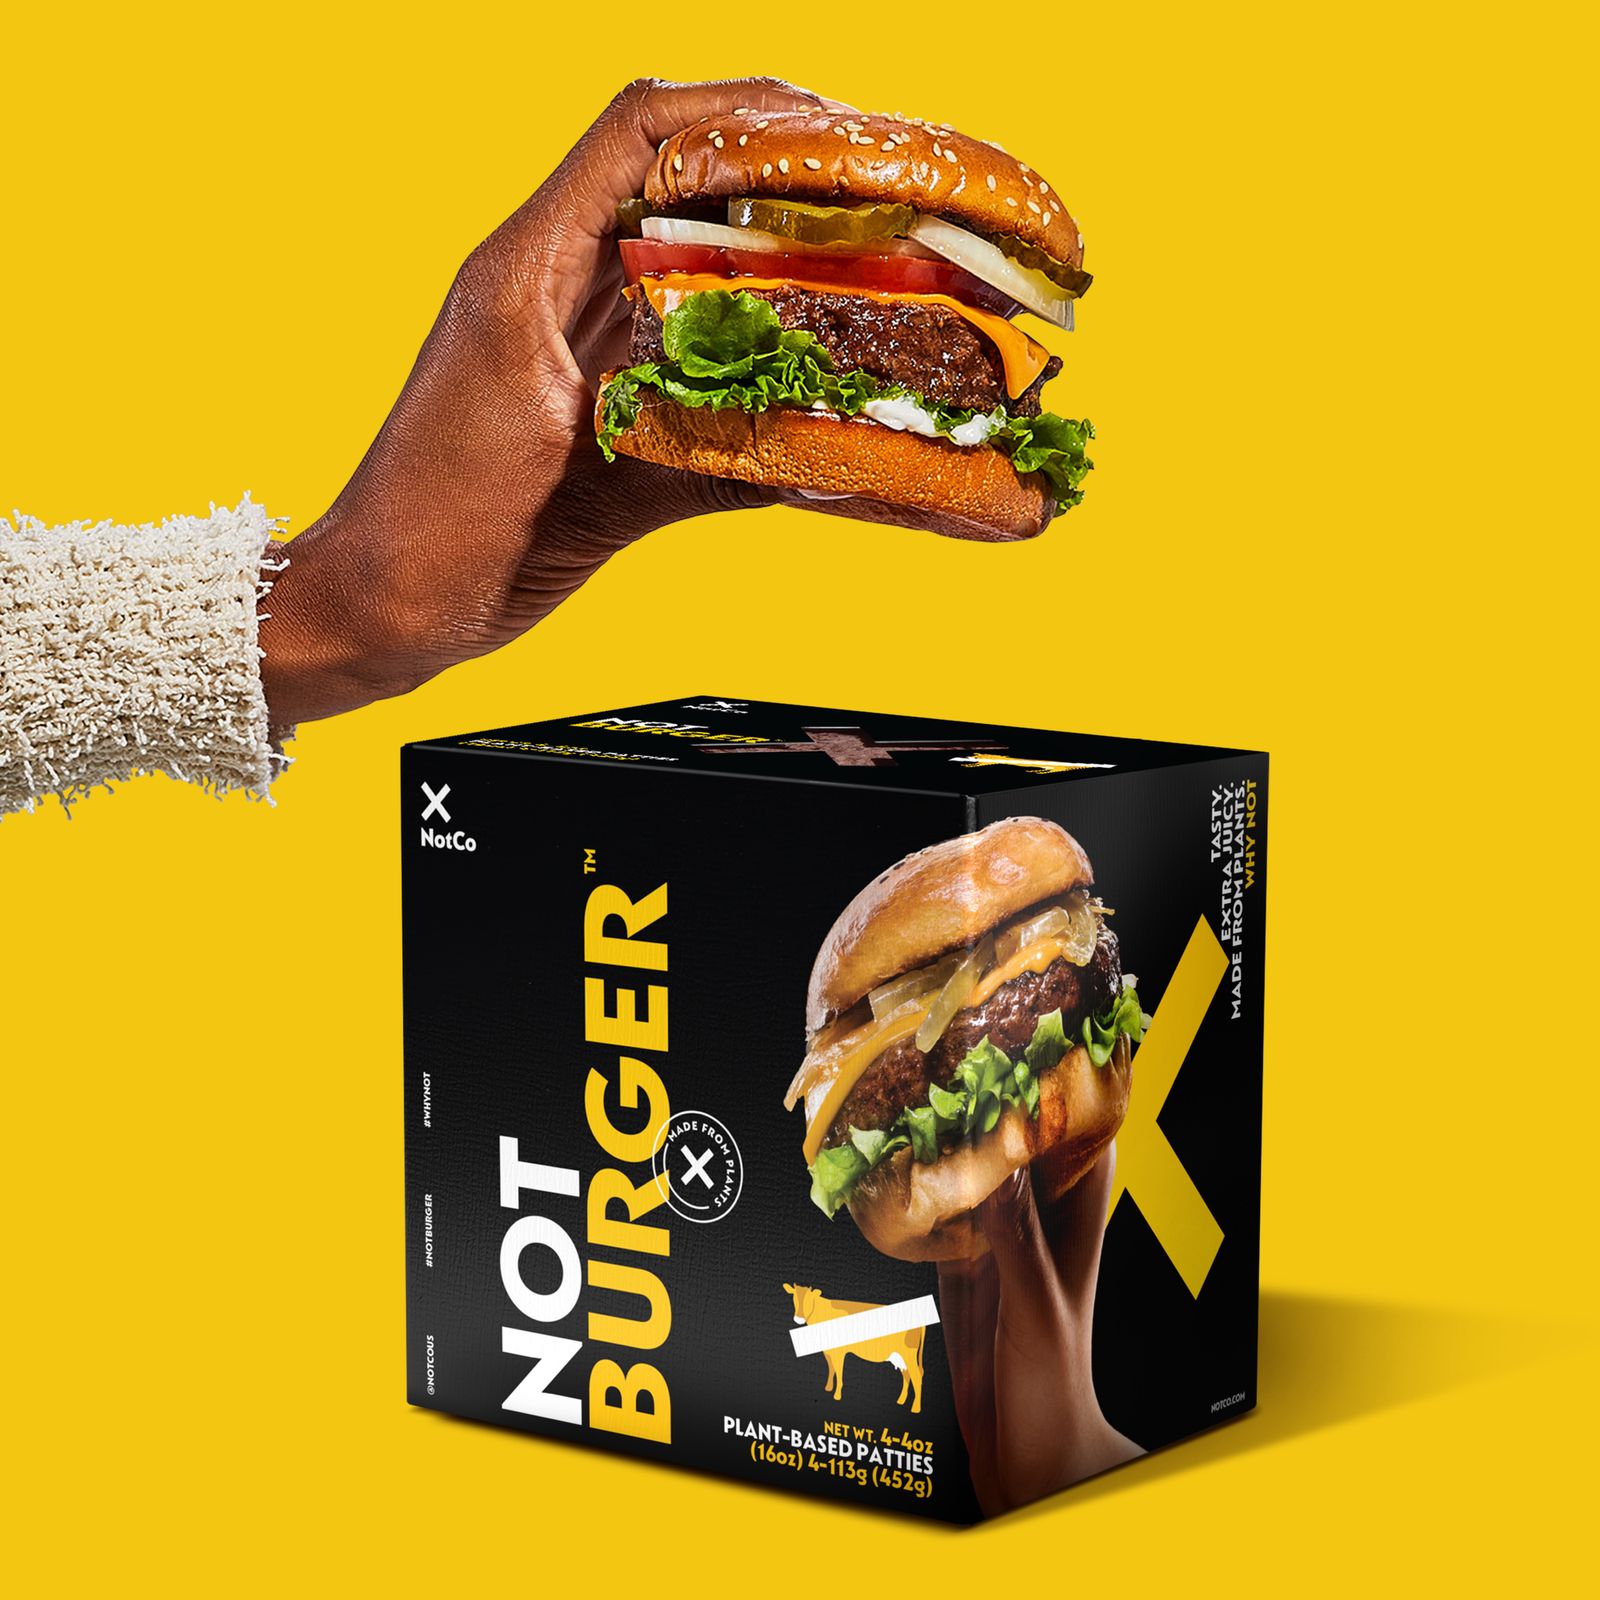 A hand holds a NotBurger above a NotBurger box on a yellow background.